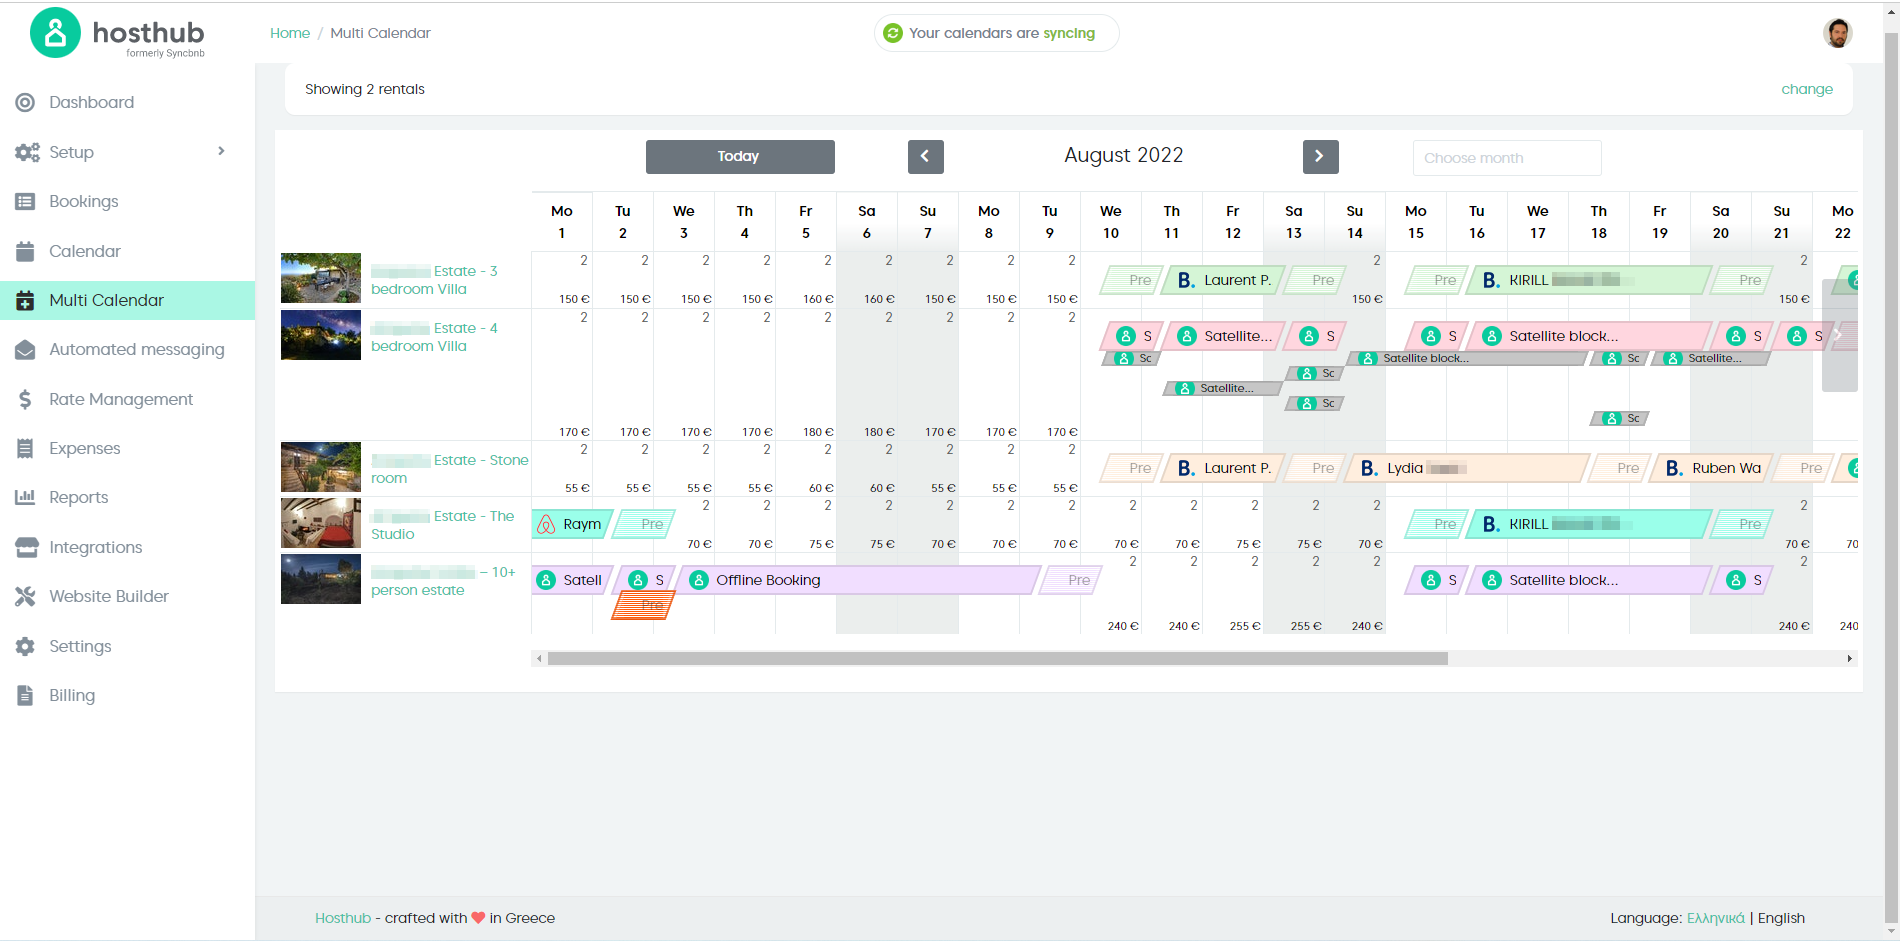 The multi calendar view lets users see bookings and availability across all their rental properties